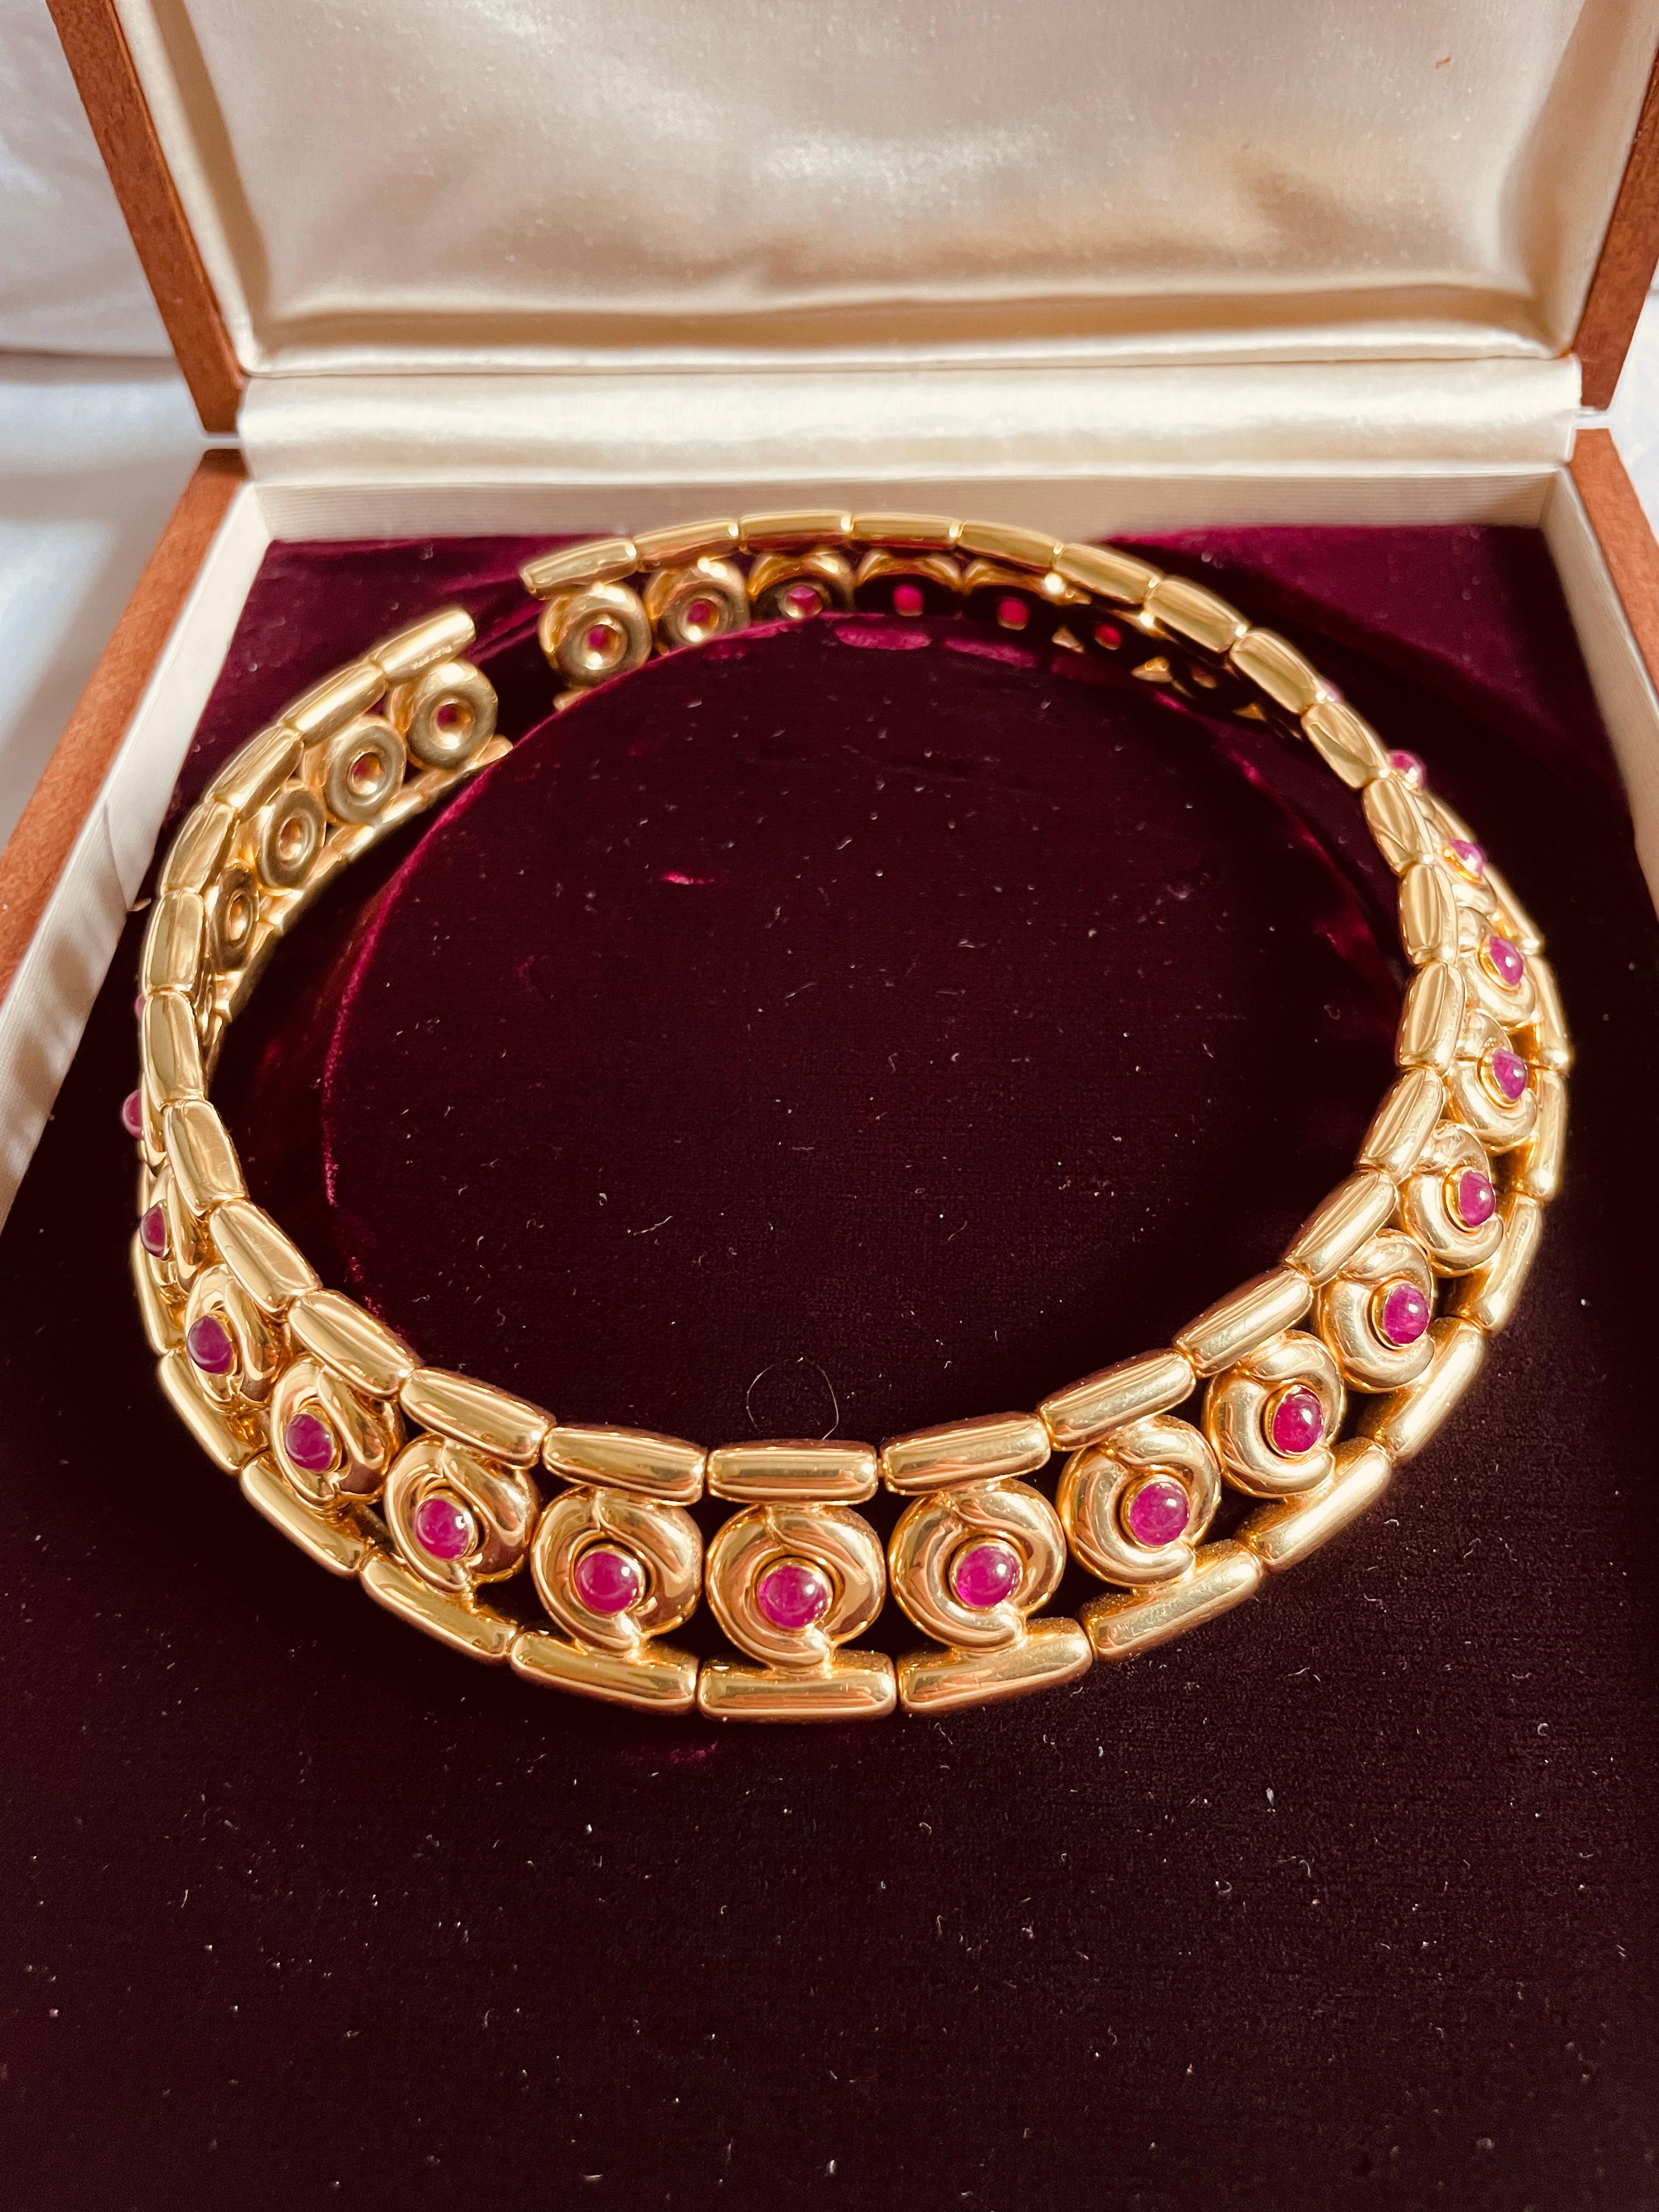 A stunning gold and ruby Chocker signed Faraone Milano, dated 1975s, 
18 Karat Yellow Gold  Cabochon round Rubies Choker Necklace by Faraone

This super chic choker style necklace features a solid 18k yellow gold design one line of 29 round